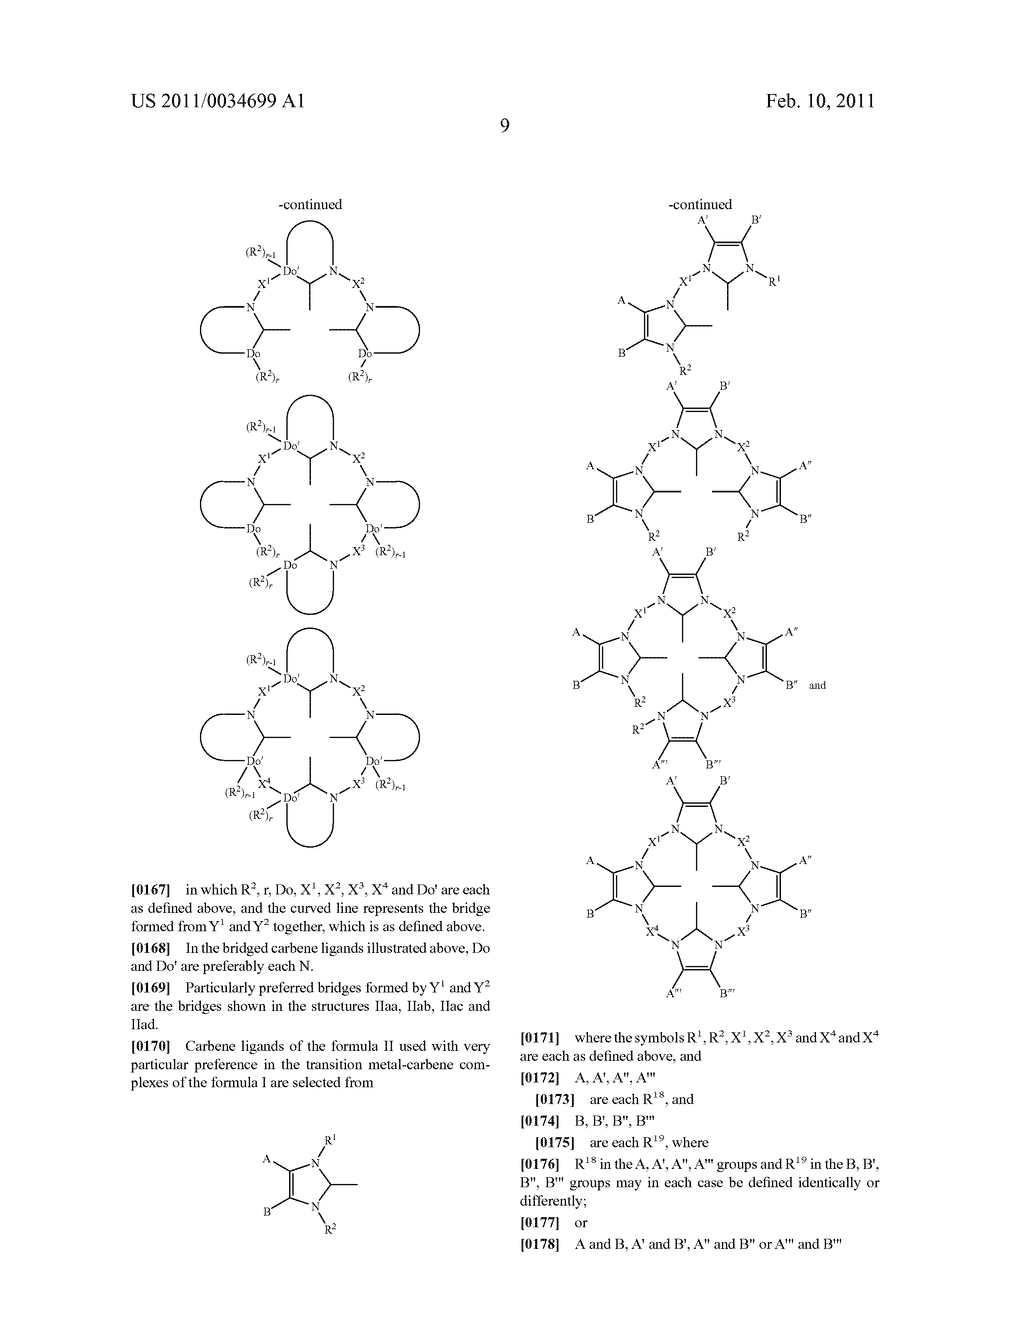 USE IN OLEDS OF TRANSITION METAL CARBENE COMPLEXES THAT CONTAIN NO CYCLOMETALLATION VIA NON-CARBENES - diagram, schematic, and image 10